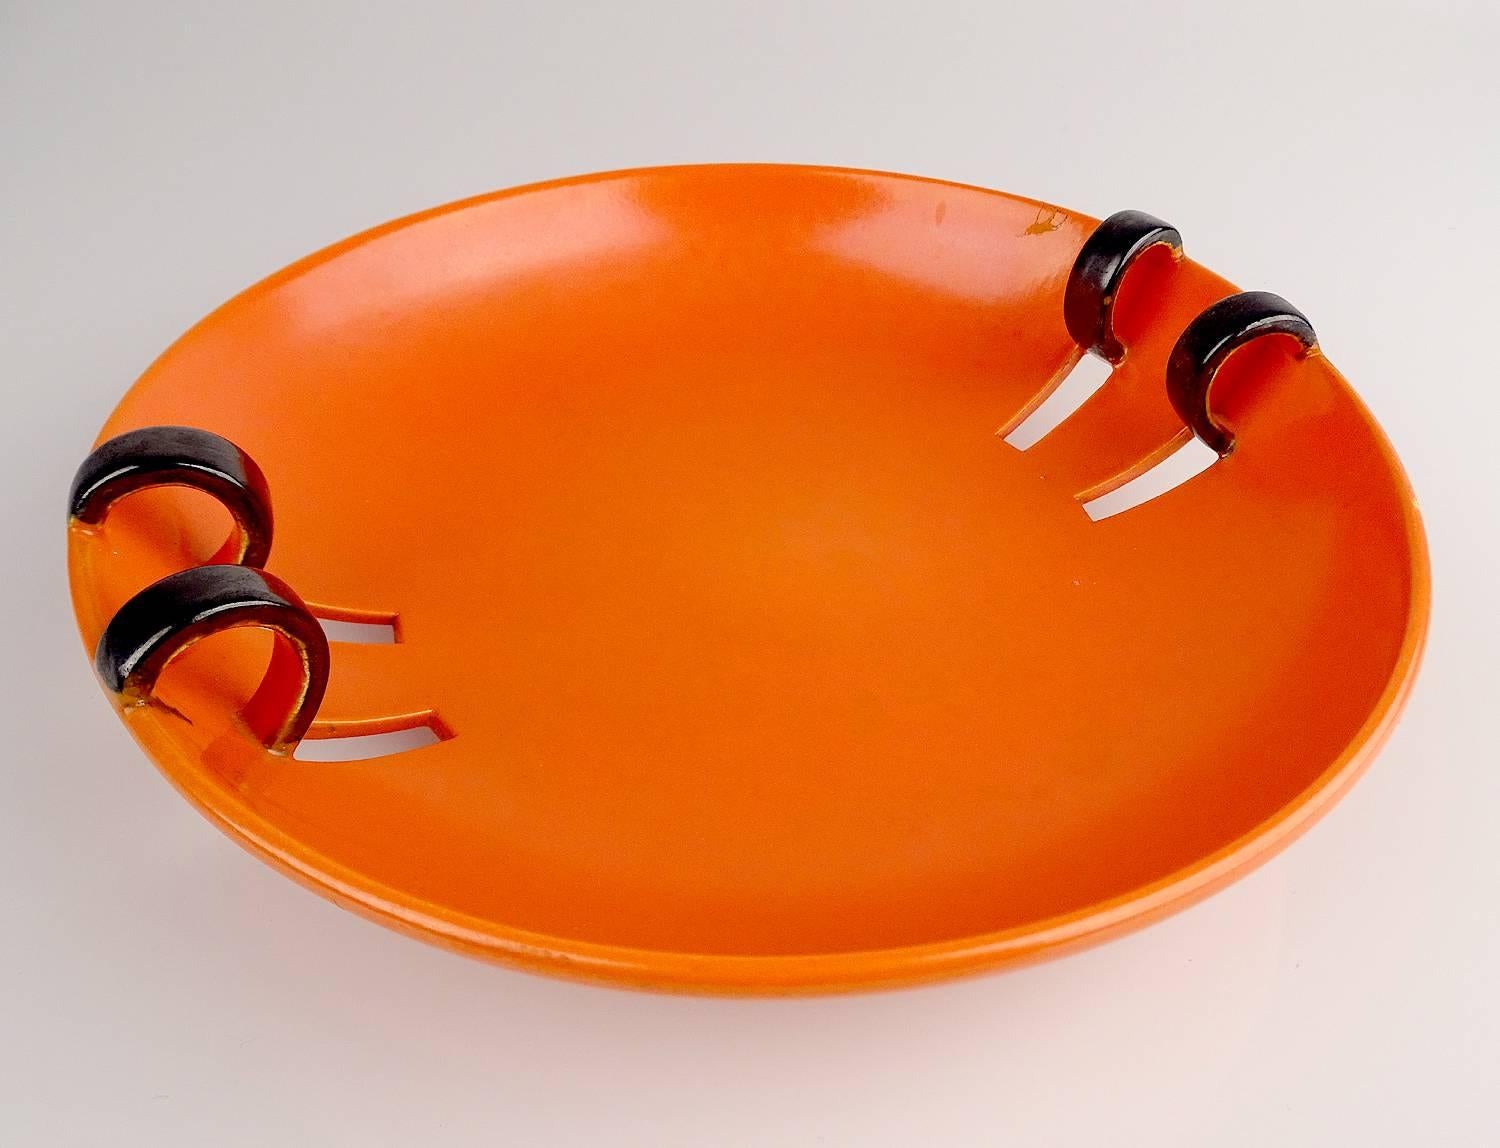 An Art Deco ceramic blow, circa 1928-1930, very rare Bauhaus orange colour with extruded loop handles 

The Art Deco style name was derived from the Exposition Internationale des Arts De´coratifs et Industriels Modernes, held in Paris in 1925,